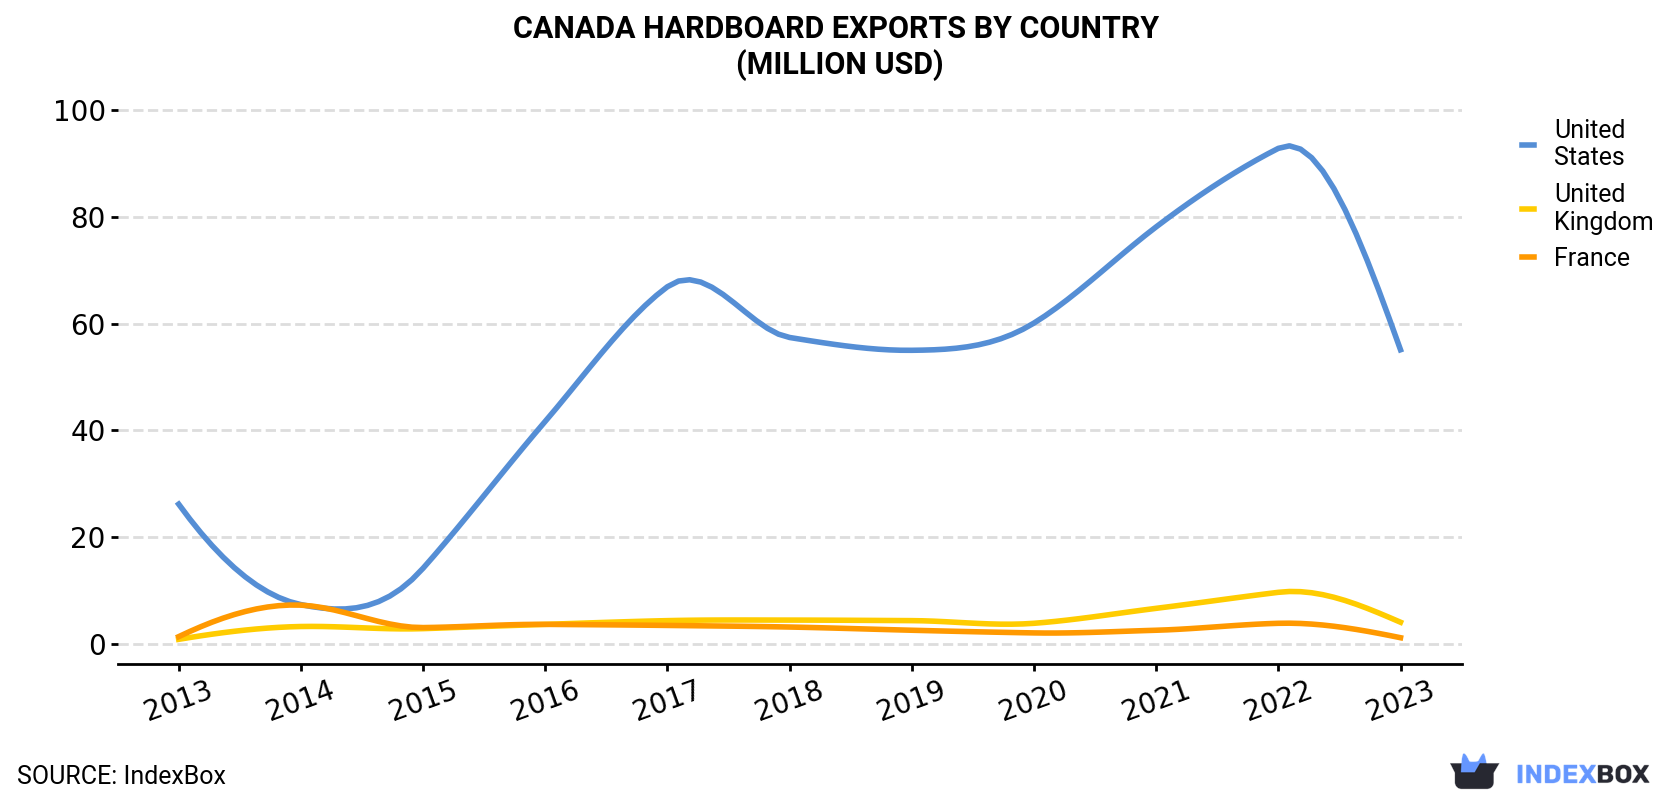 Canada Hardboard Exports By Country (Million USD)